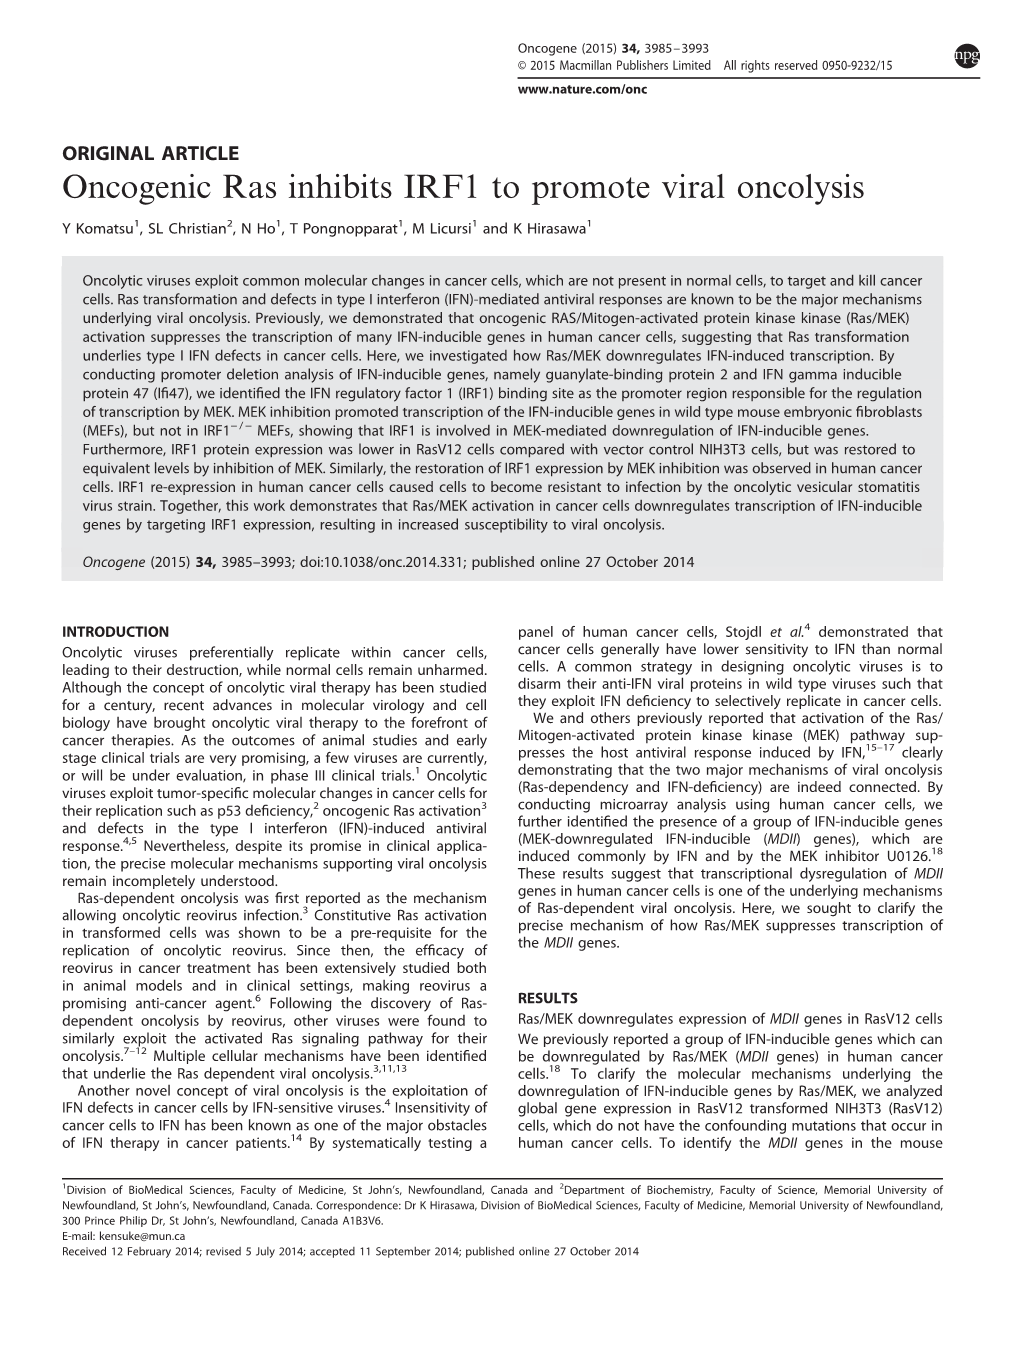 Oncogenic Ras Inhibits IRF1 to Promote Viral Oncolysis